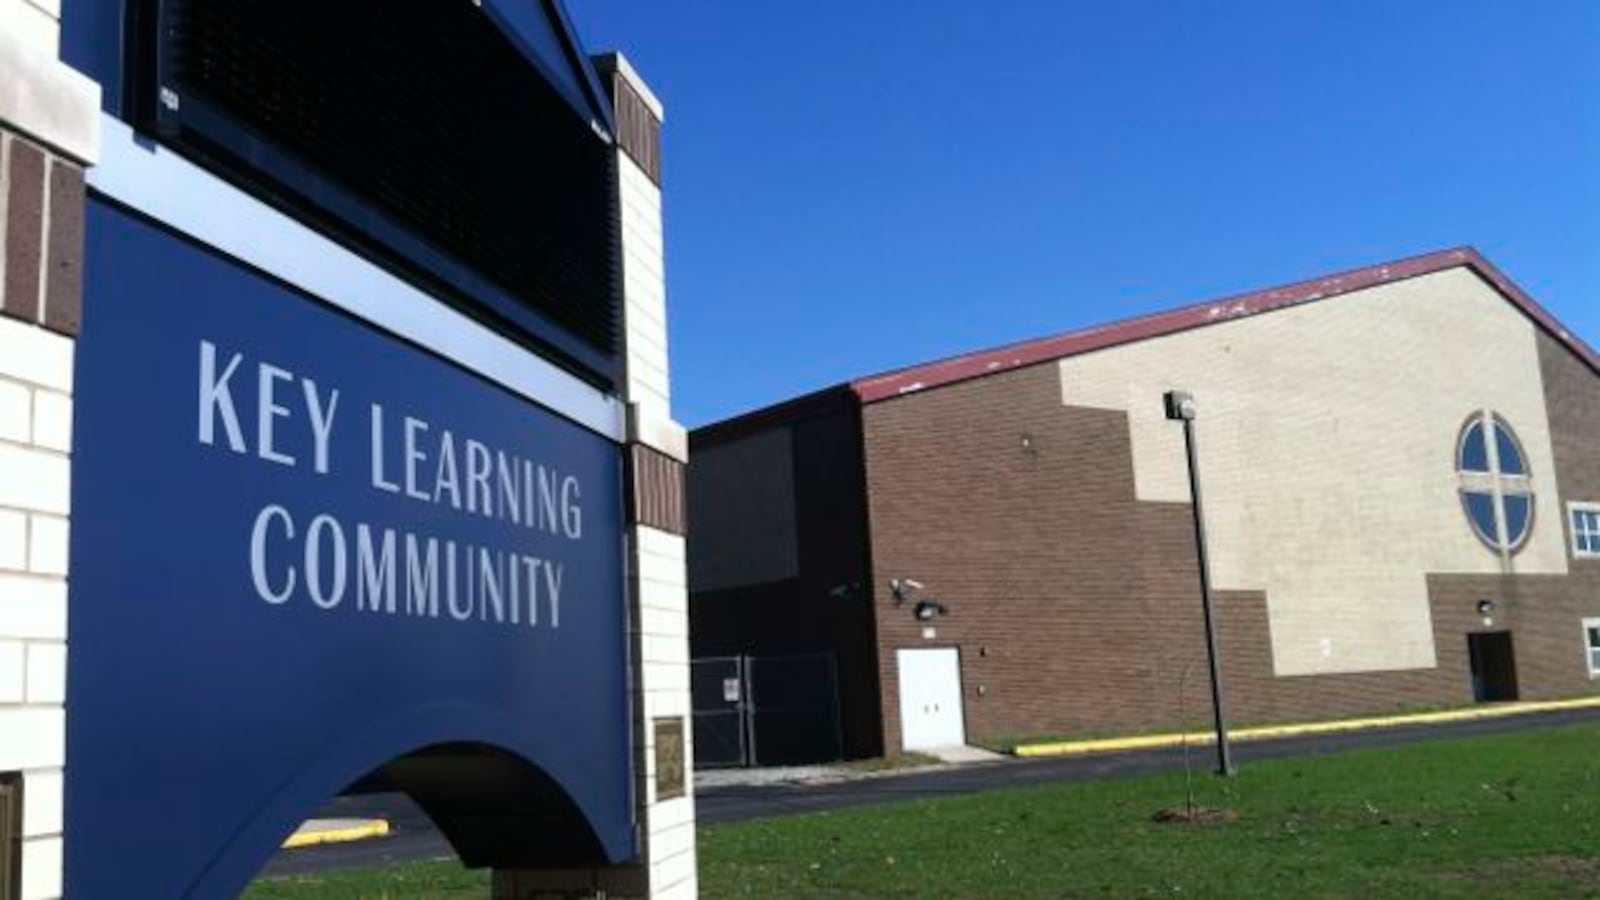 Key Learning Community, a K-12 school famous for its unique curriculum, will close at the end of the school year.